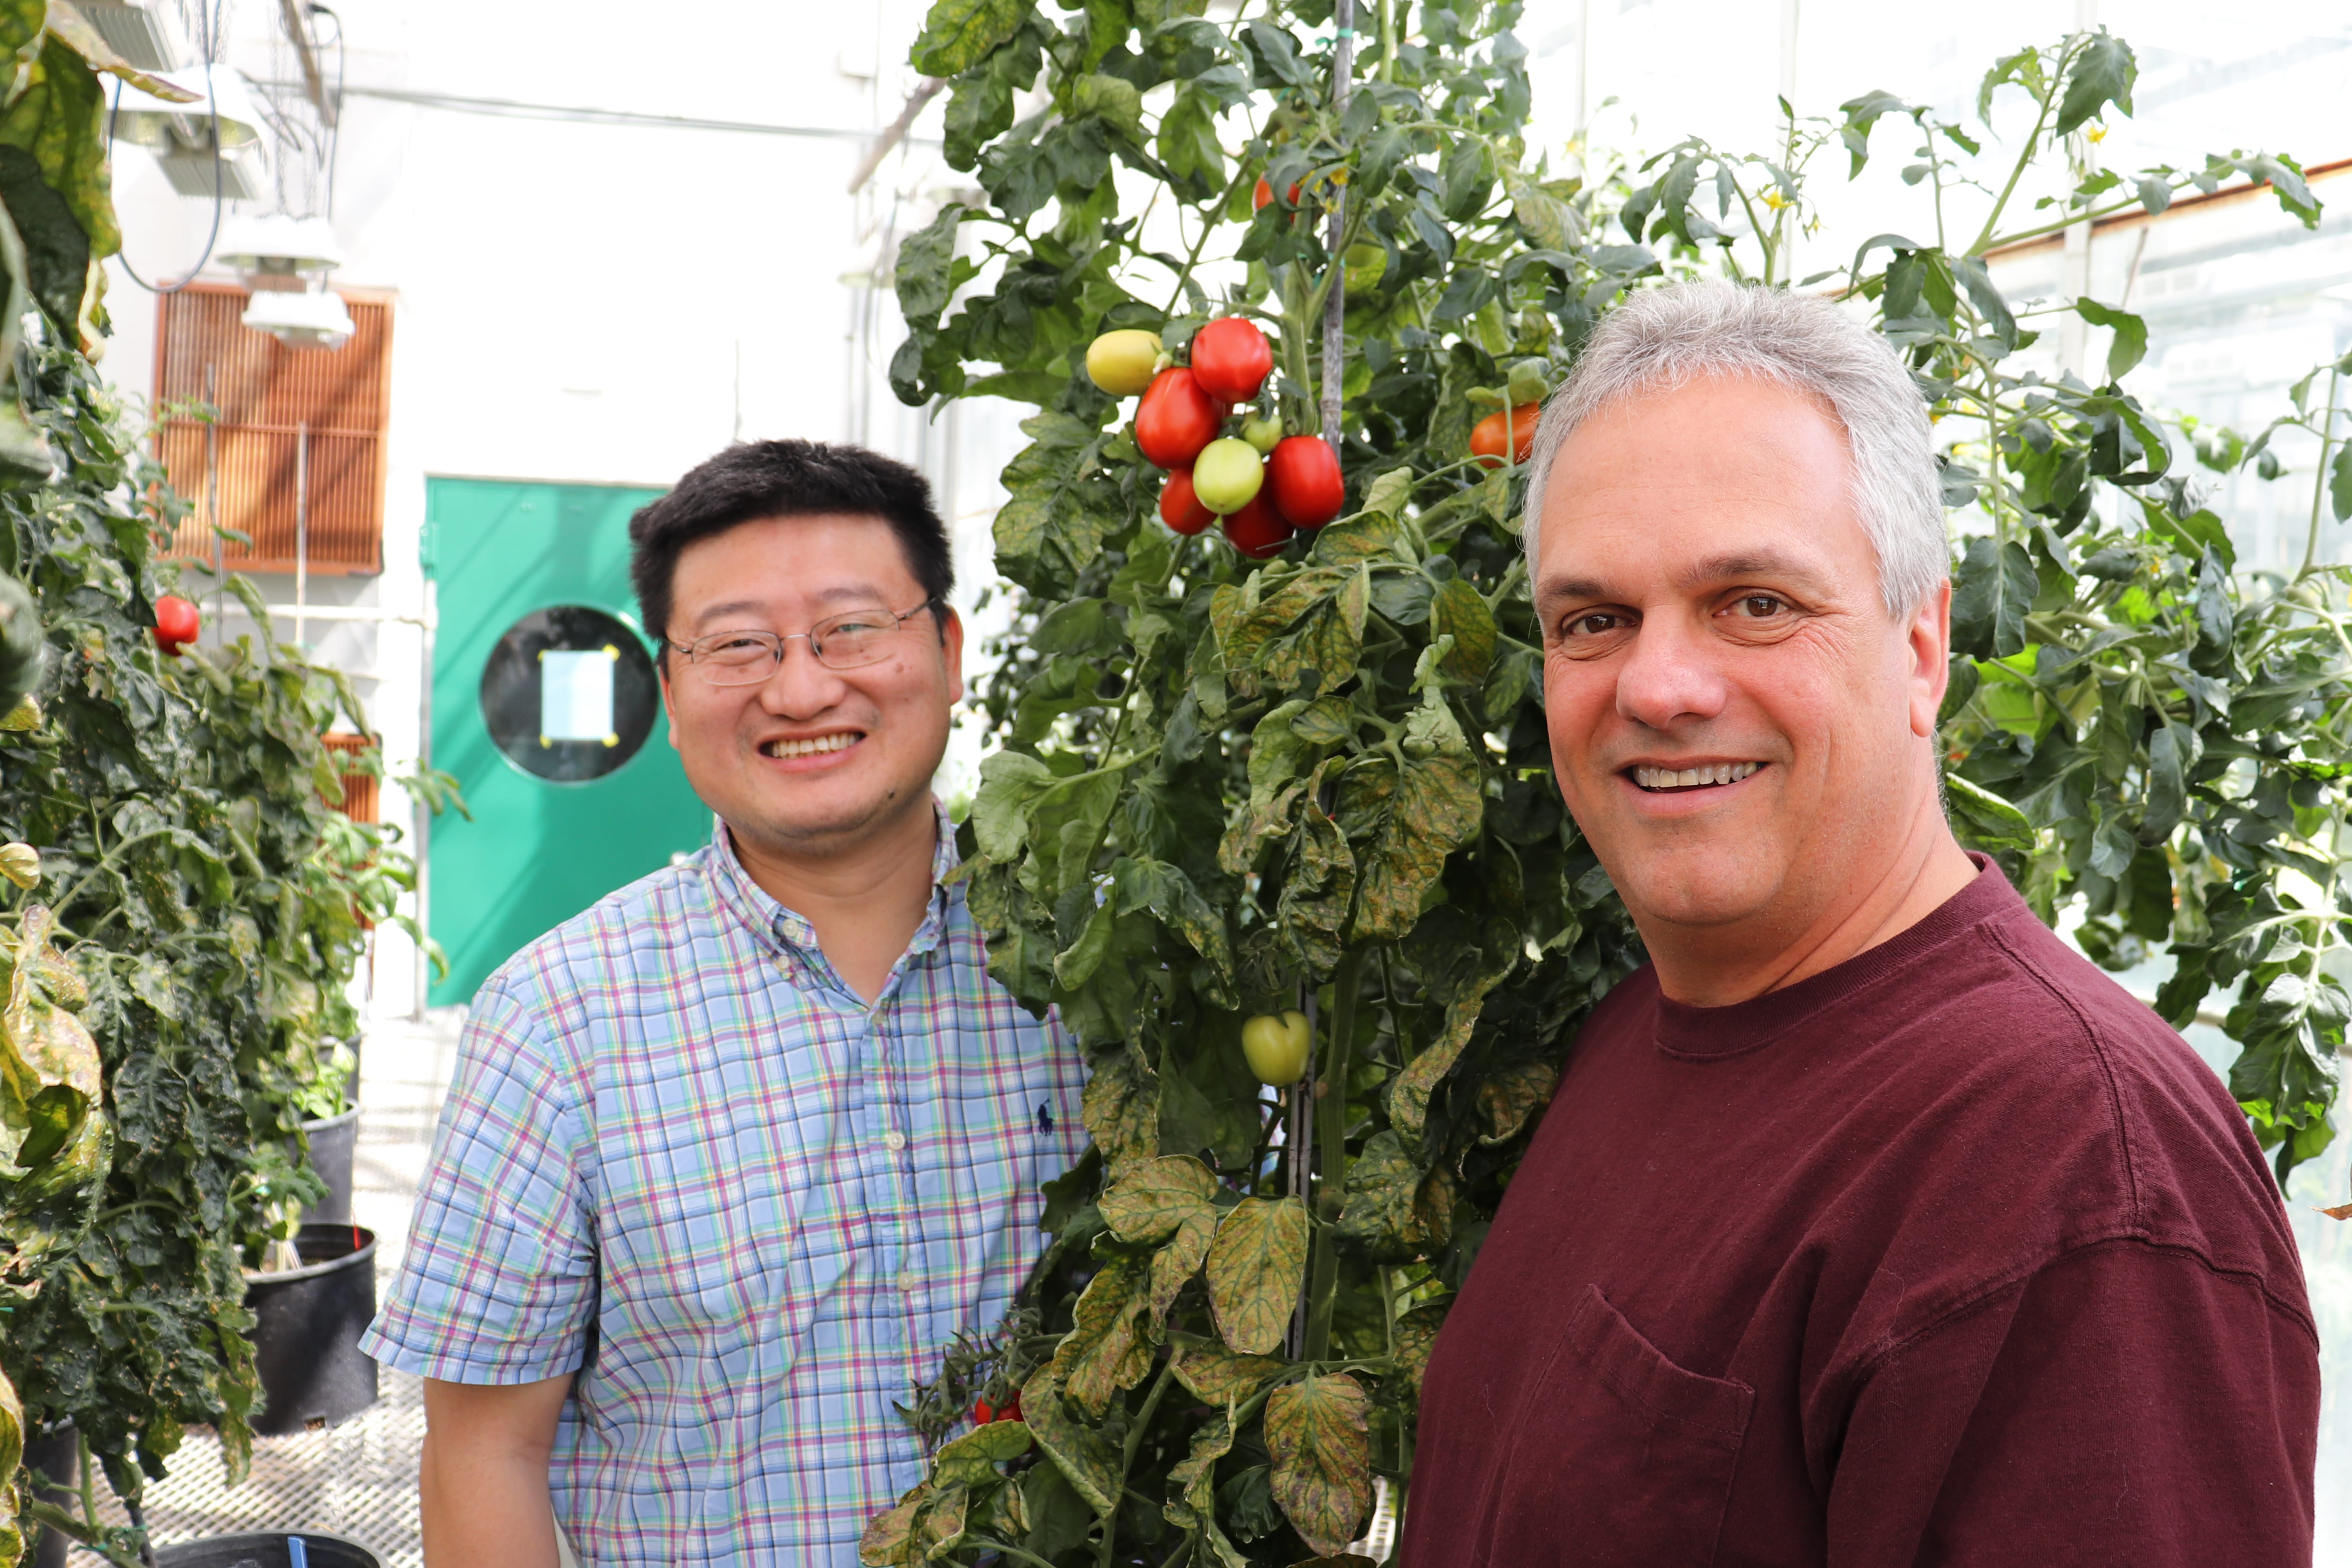 Zhangjun Fei and James Giovannoni with some tomatoes in a BTI greenhouse.